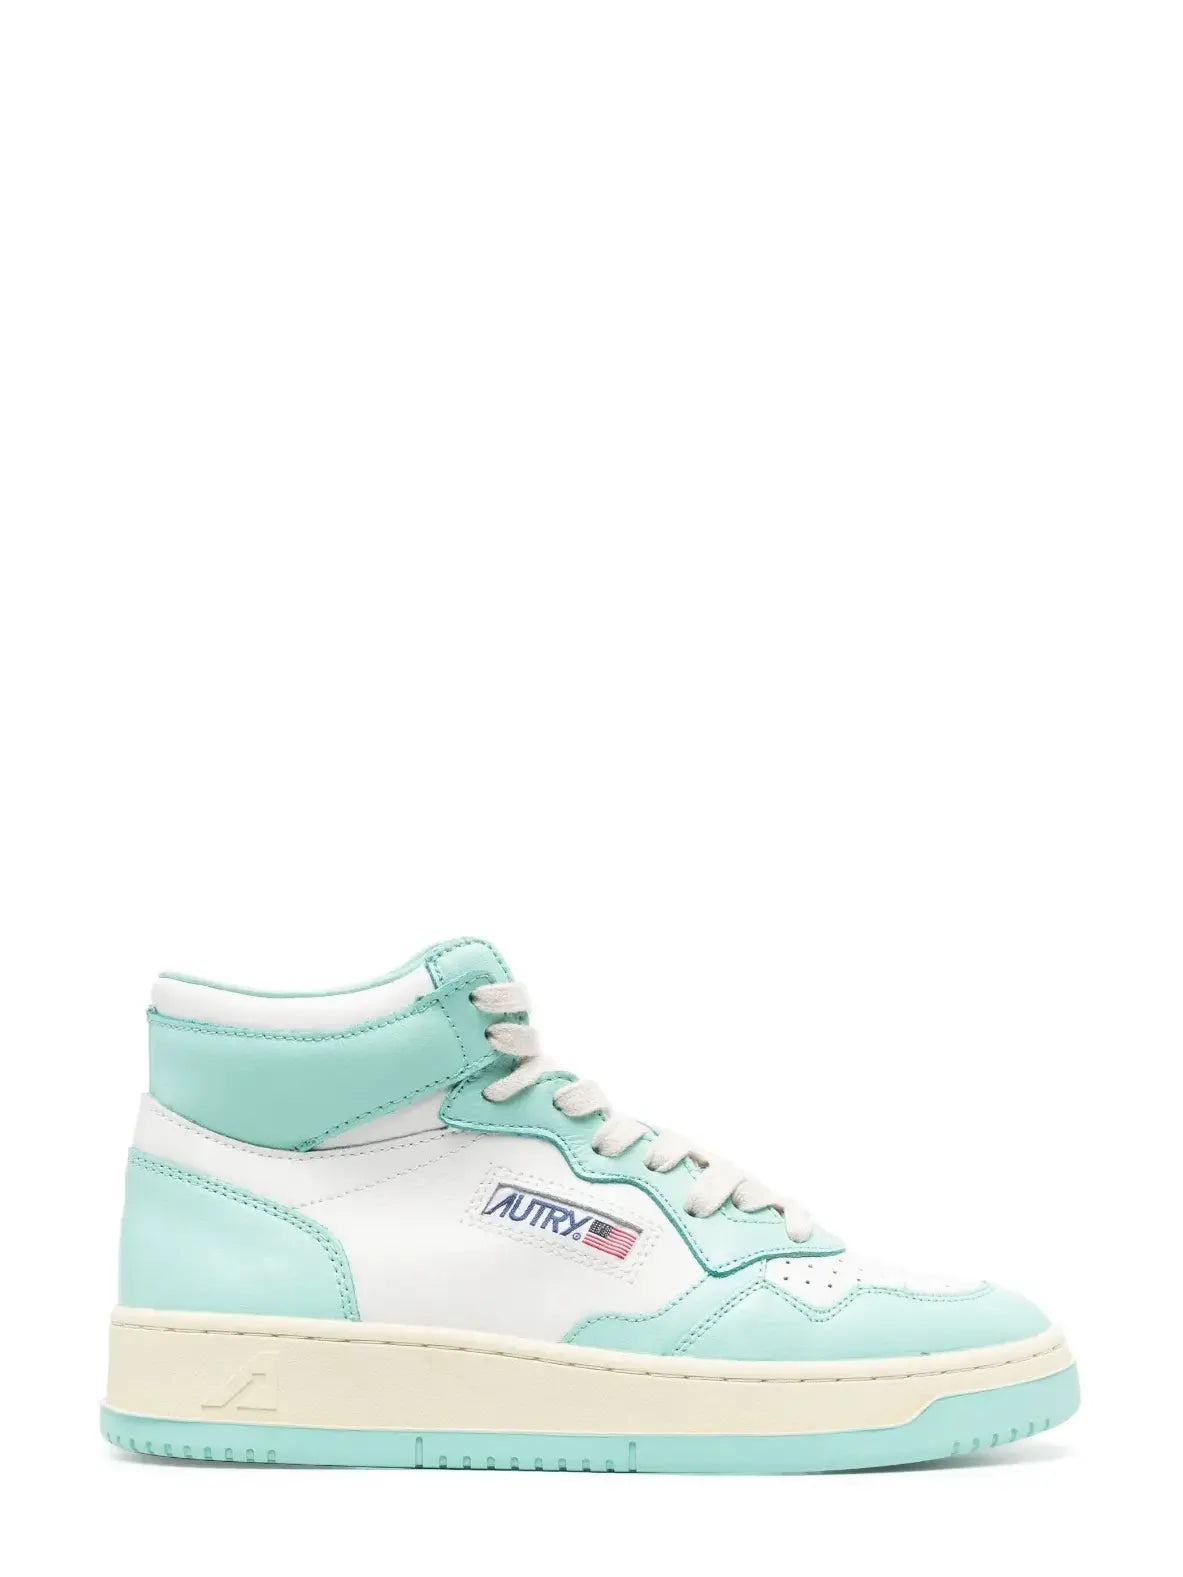 Medalist high-top sneakers, turquoise